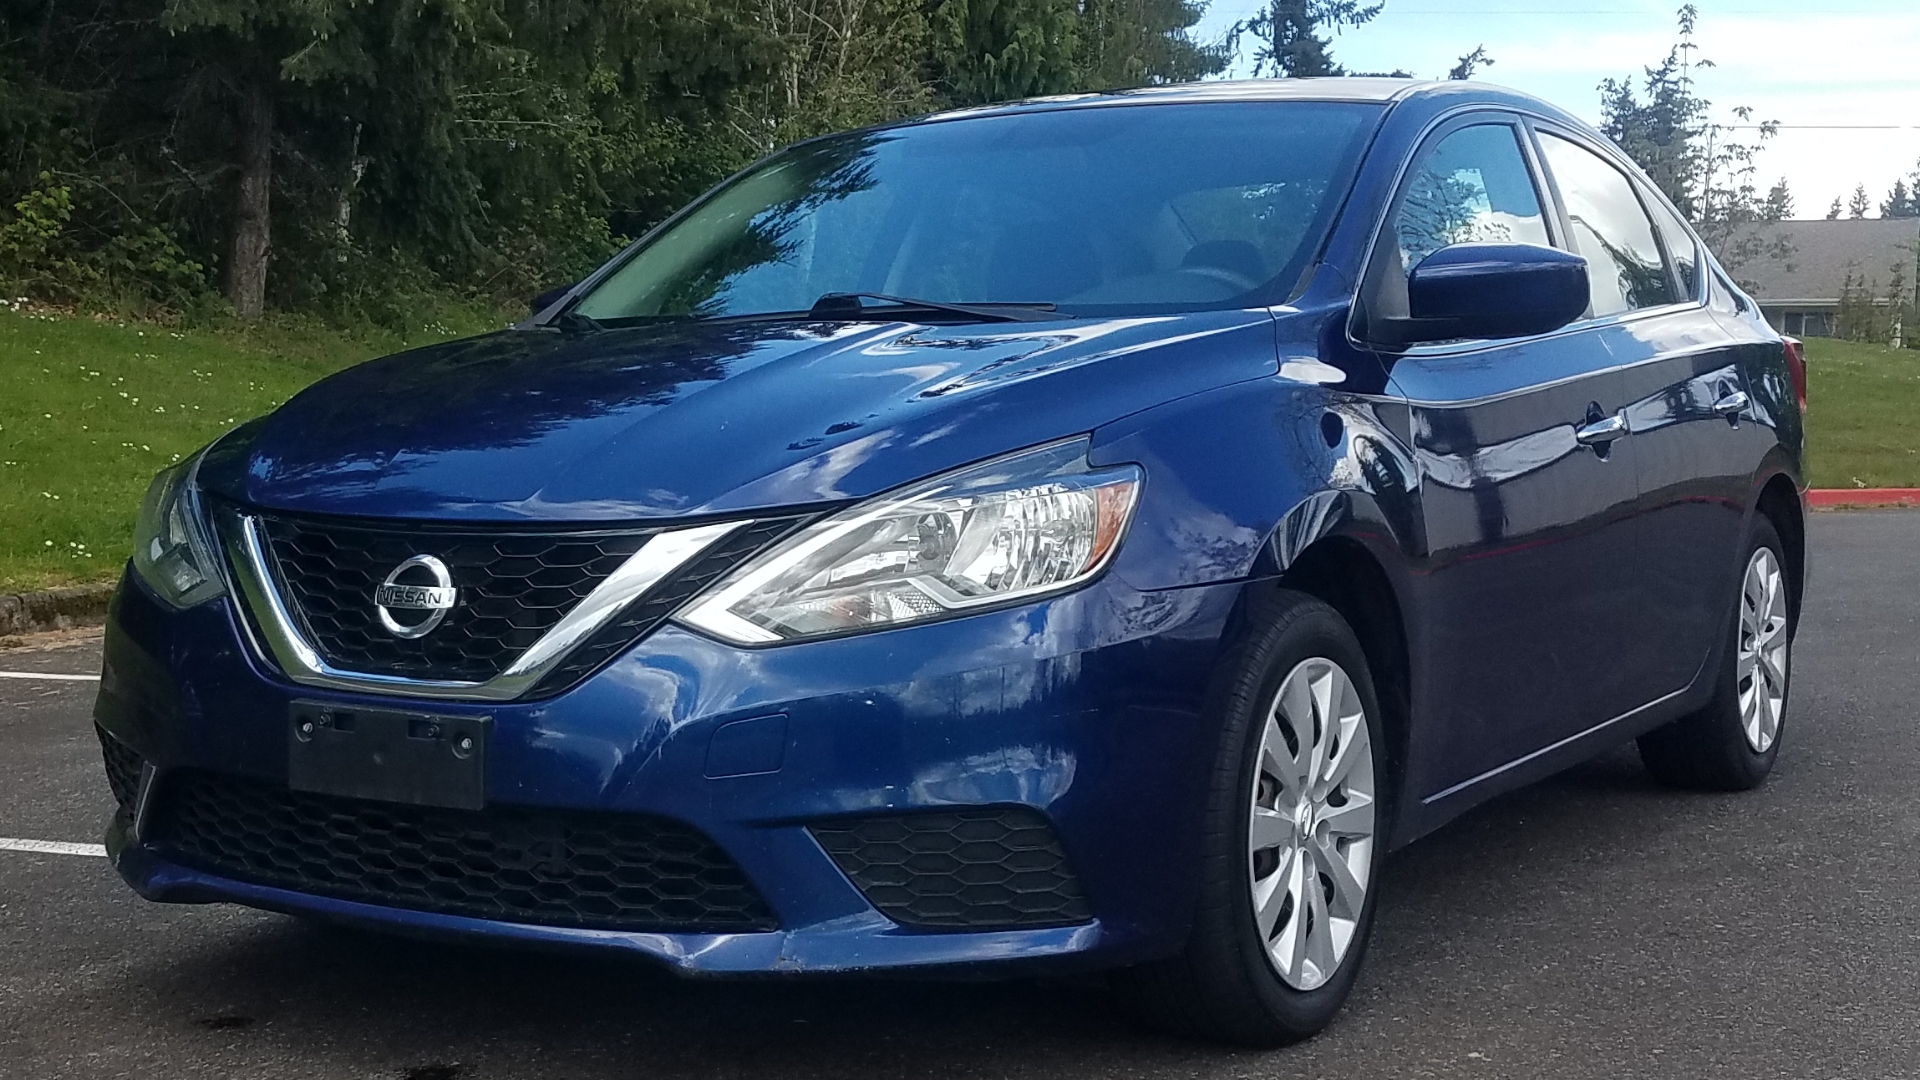 2017 Nissan Sentra preview